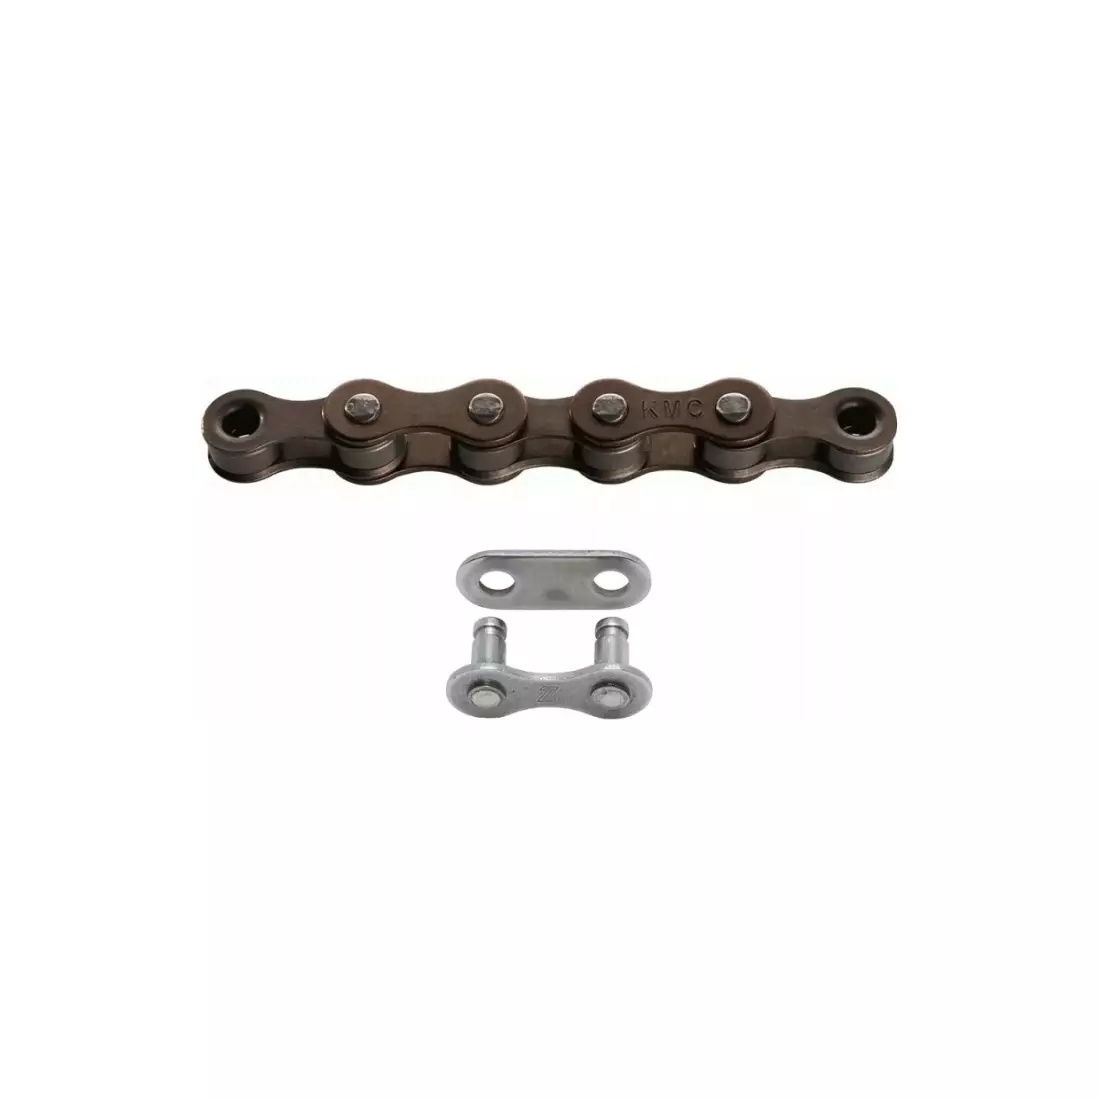 KMC S1 bicycle chain, 1 speed, 112 links, brown